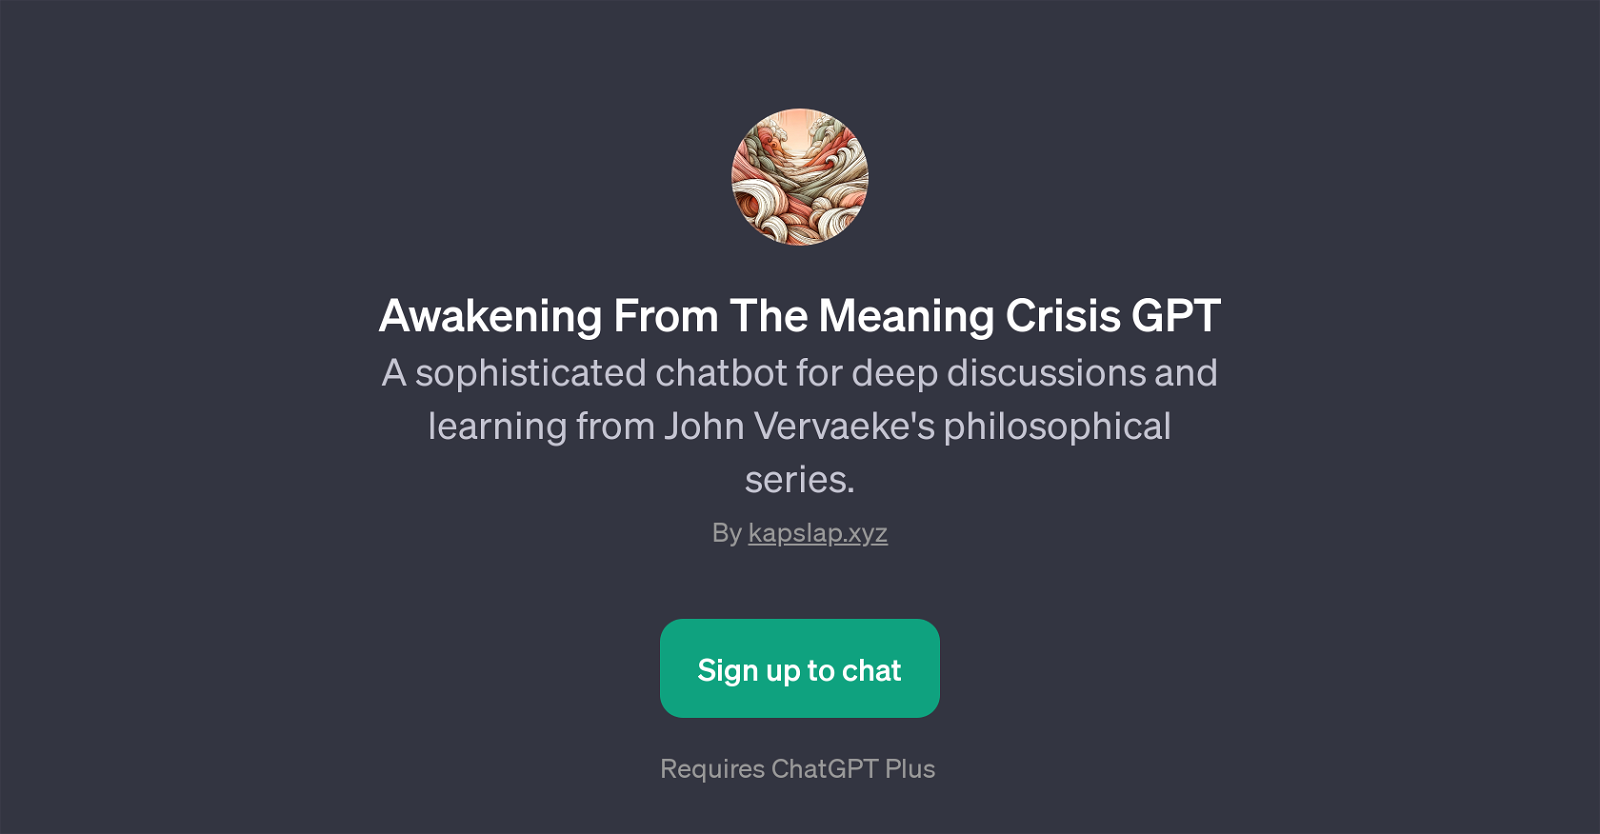 Awakening From The Meaning Crisis GPT website